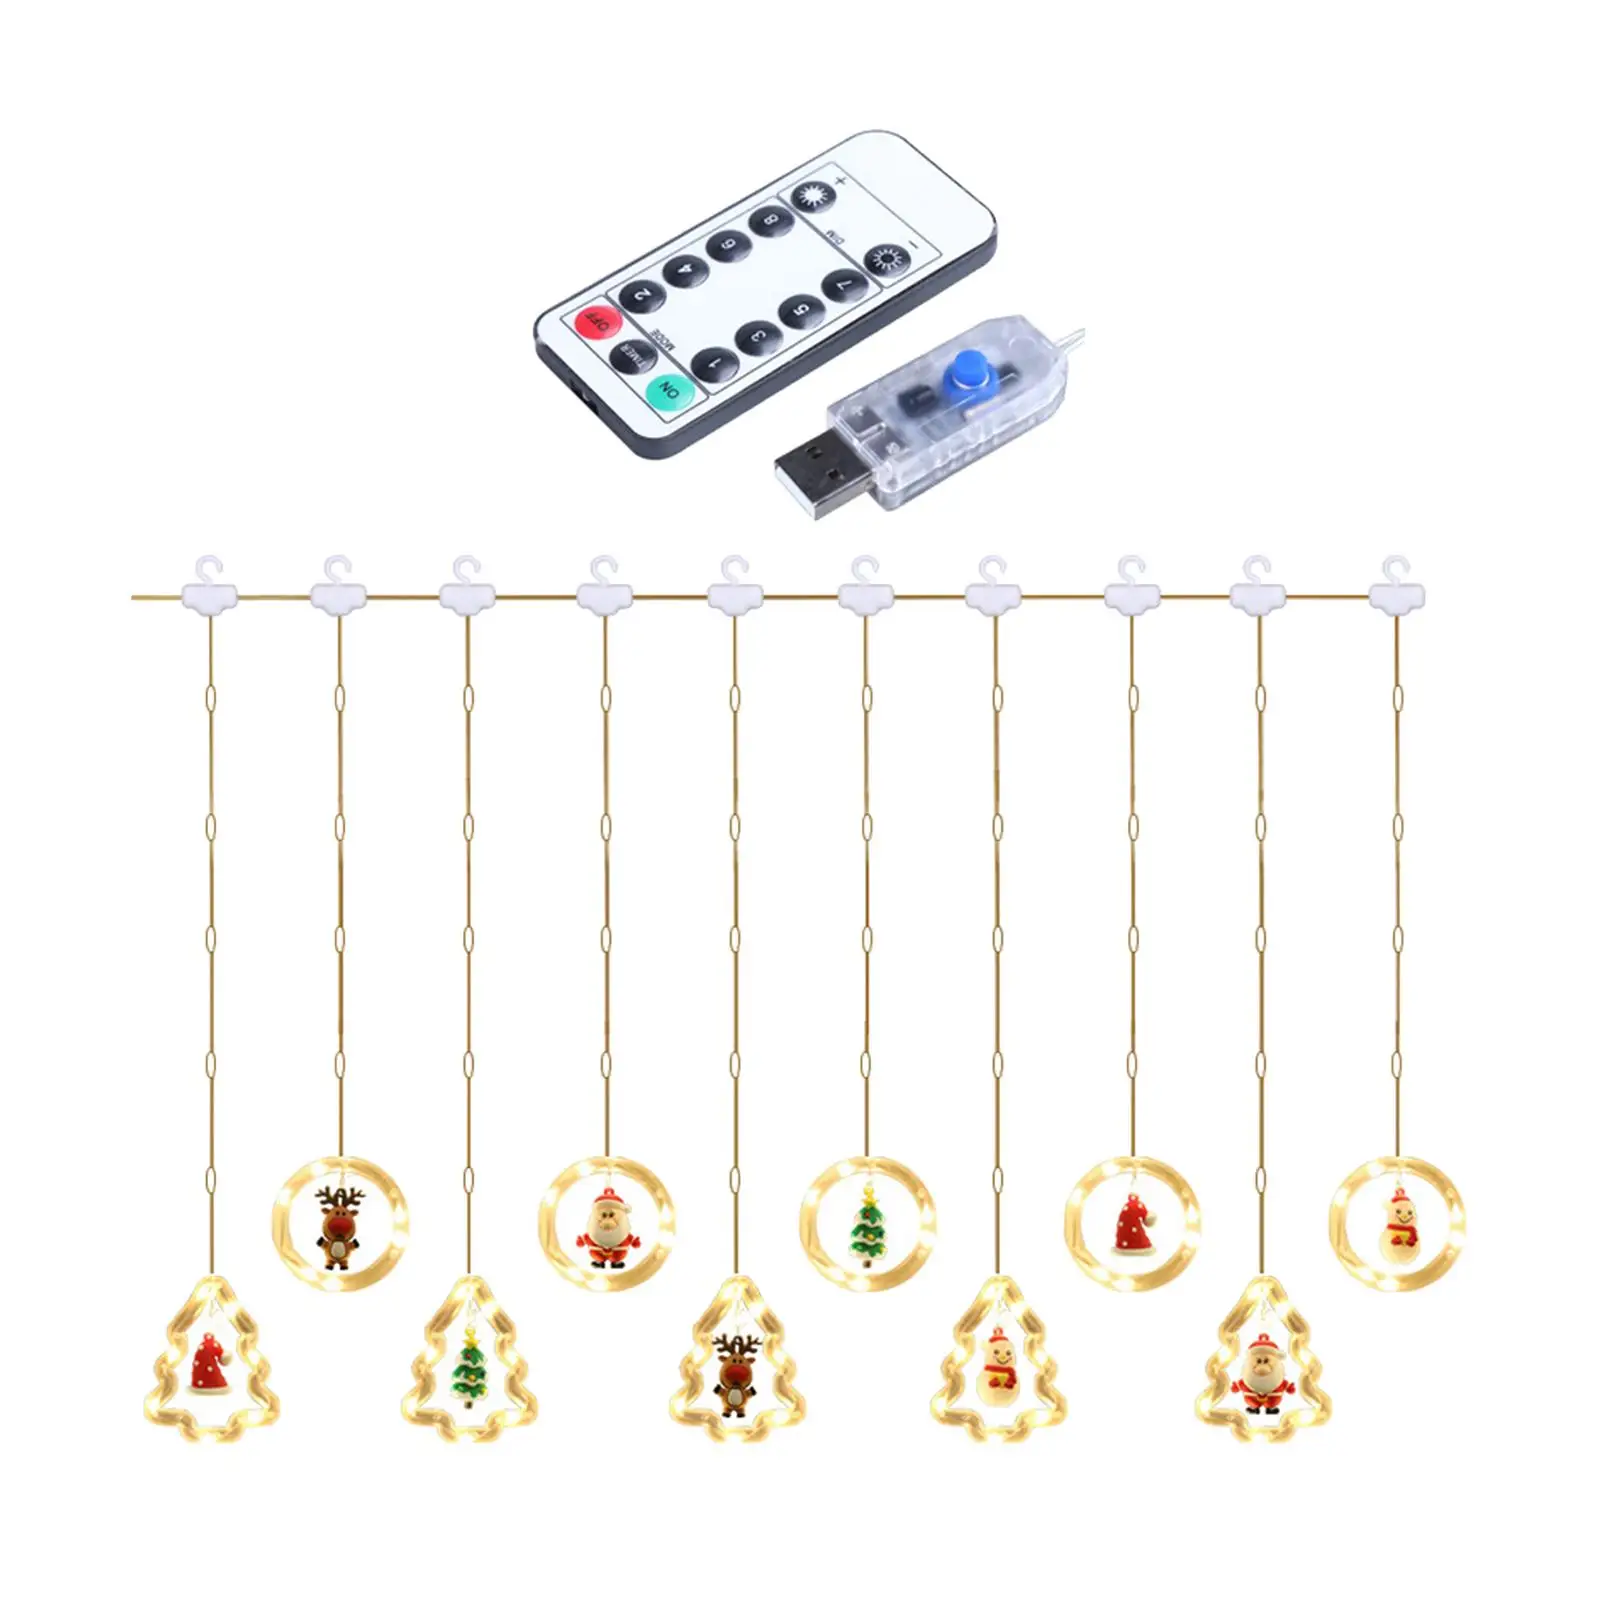 LED Christmas String Light Lighting Remote Control Ornament Hanging for Indoor Party Bar Patio Decoration